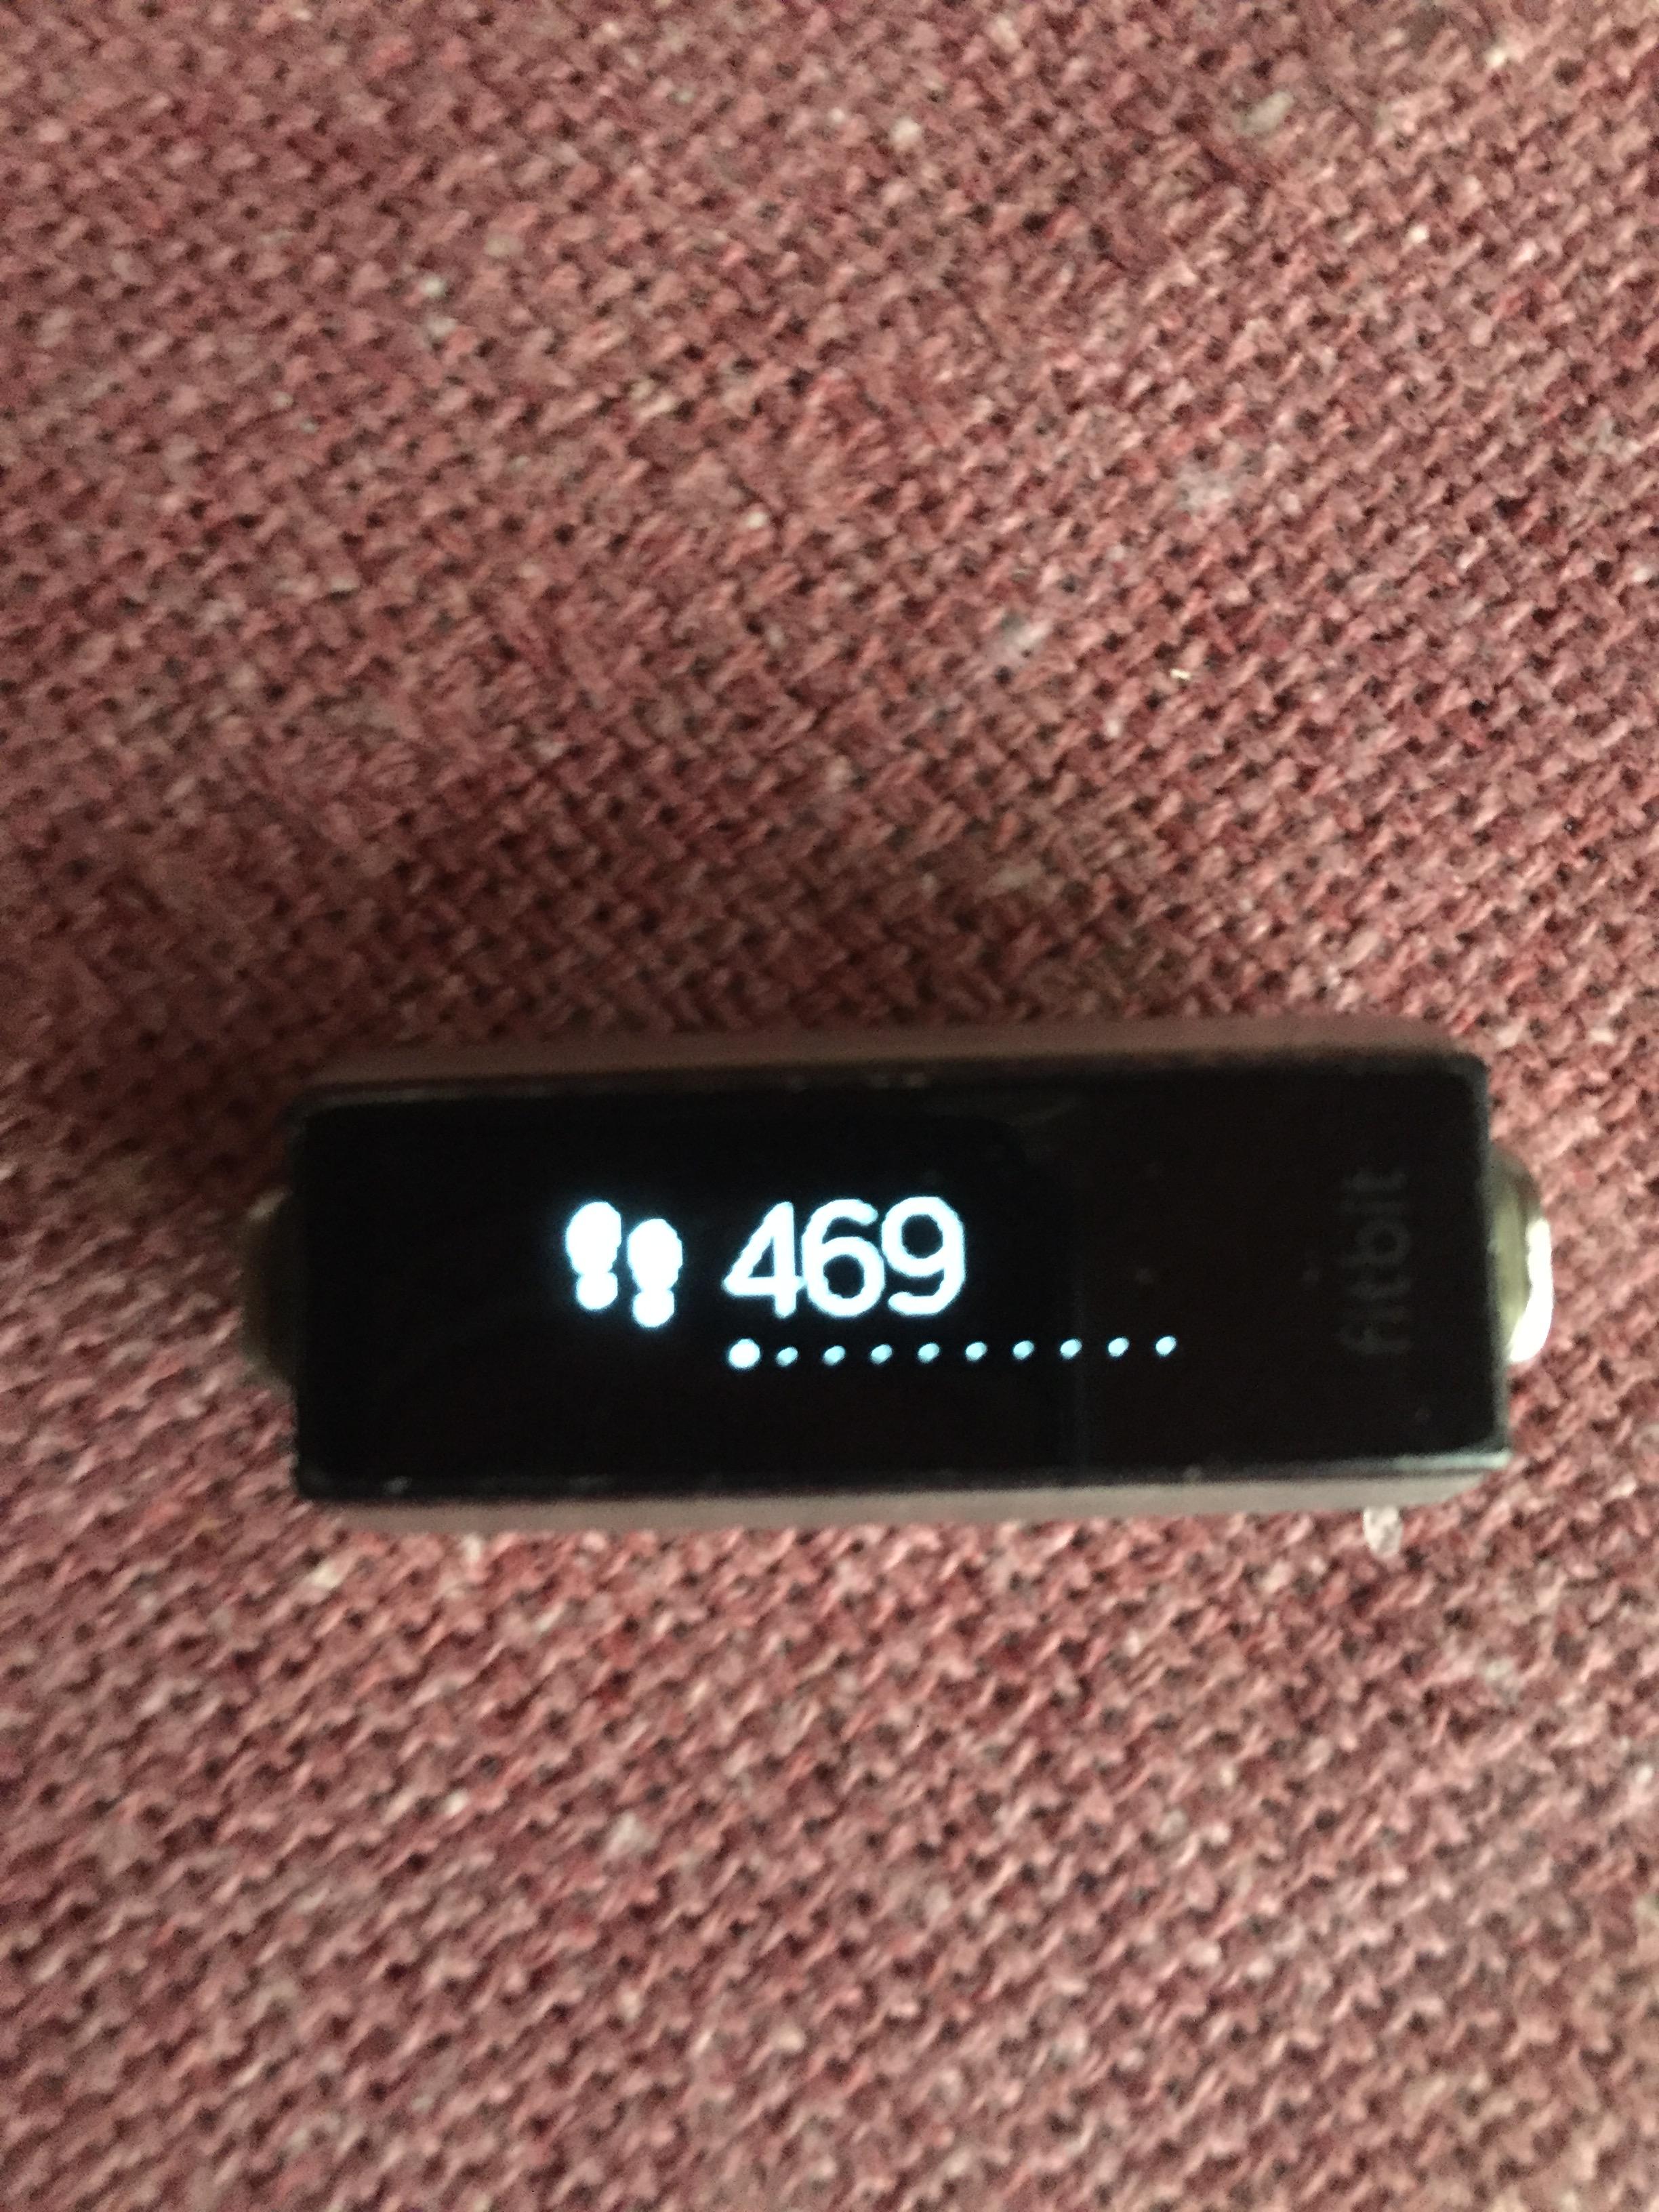 change font size on fitbit inspire